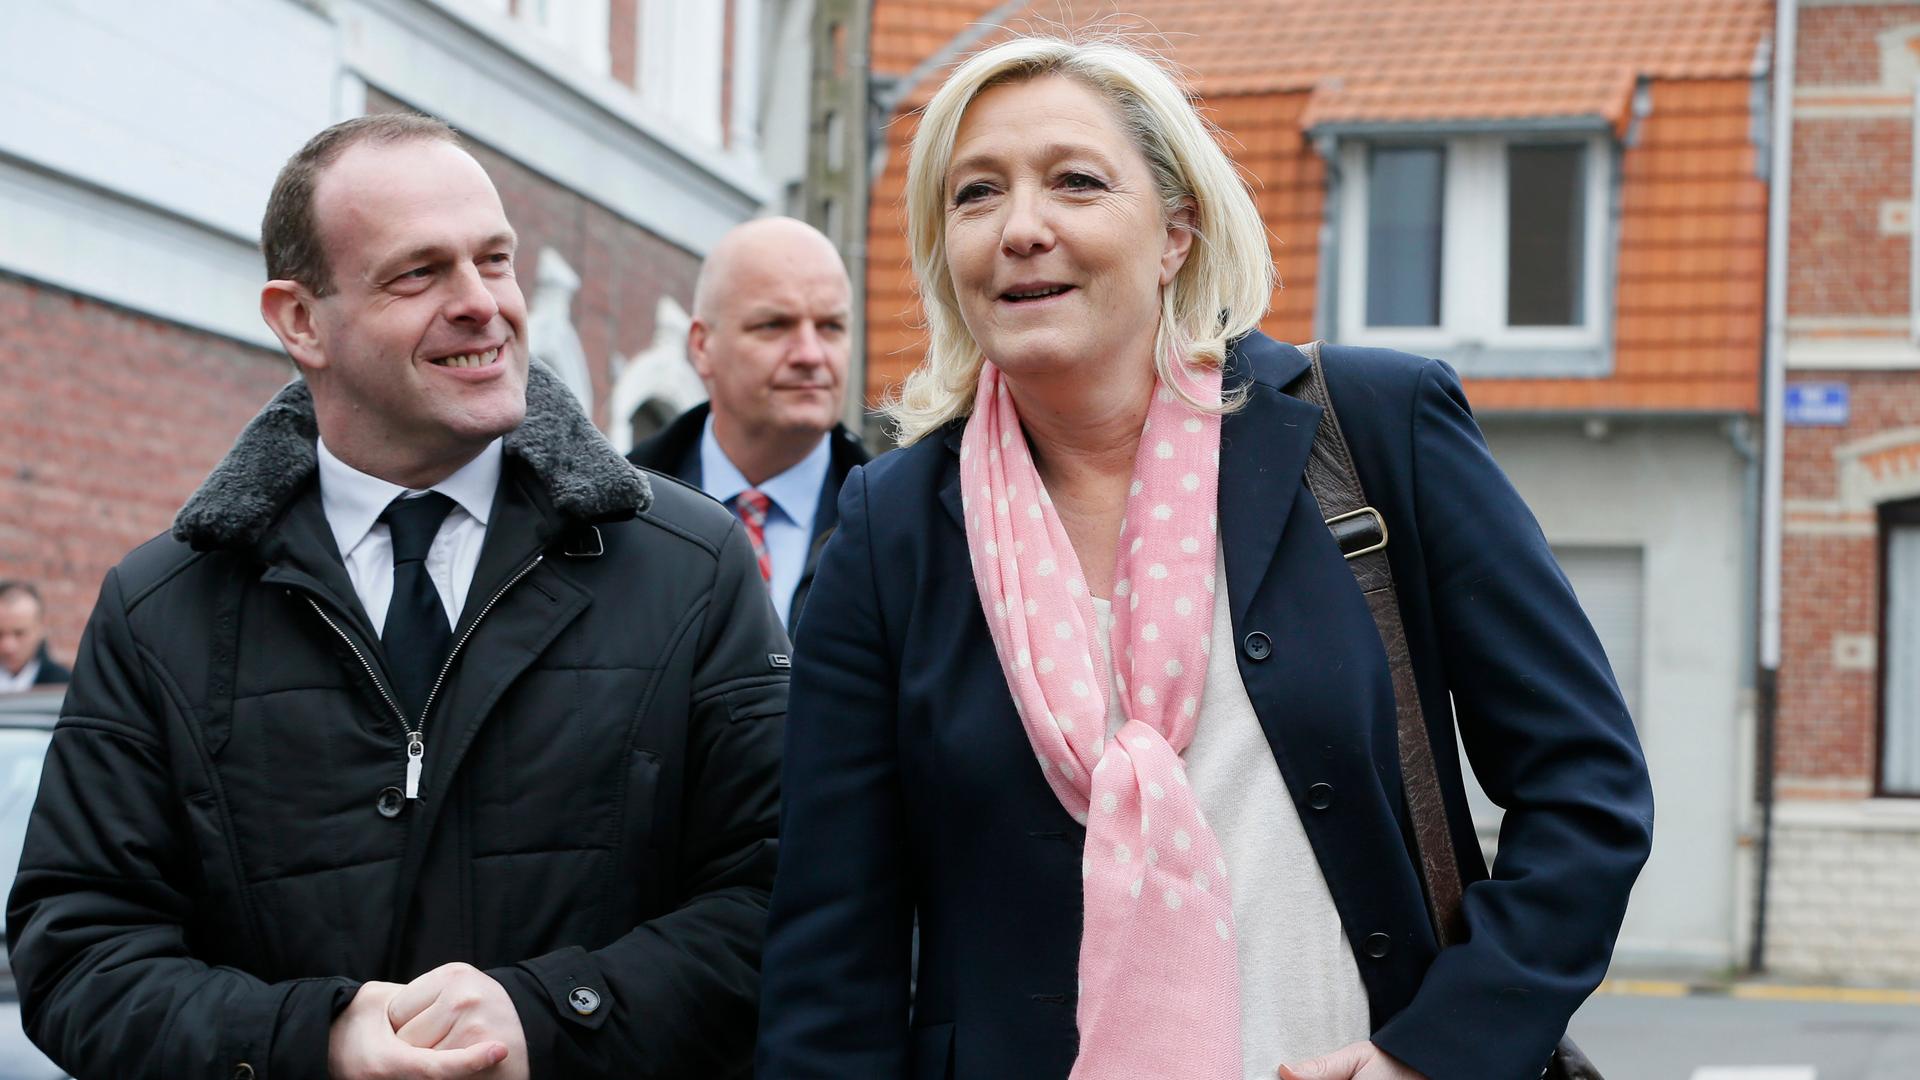 France's far-right National Front leader, Marine Le Pen (R), and Mayor of Henin-Beaumont, Steeve Briois, leave a polling station, March 2015.